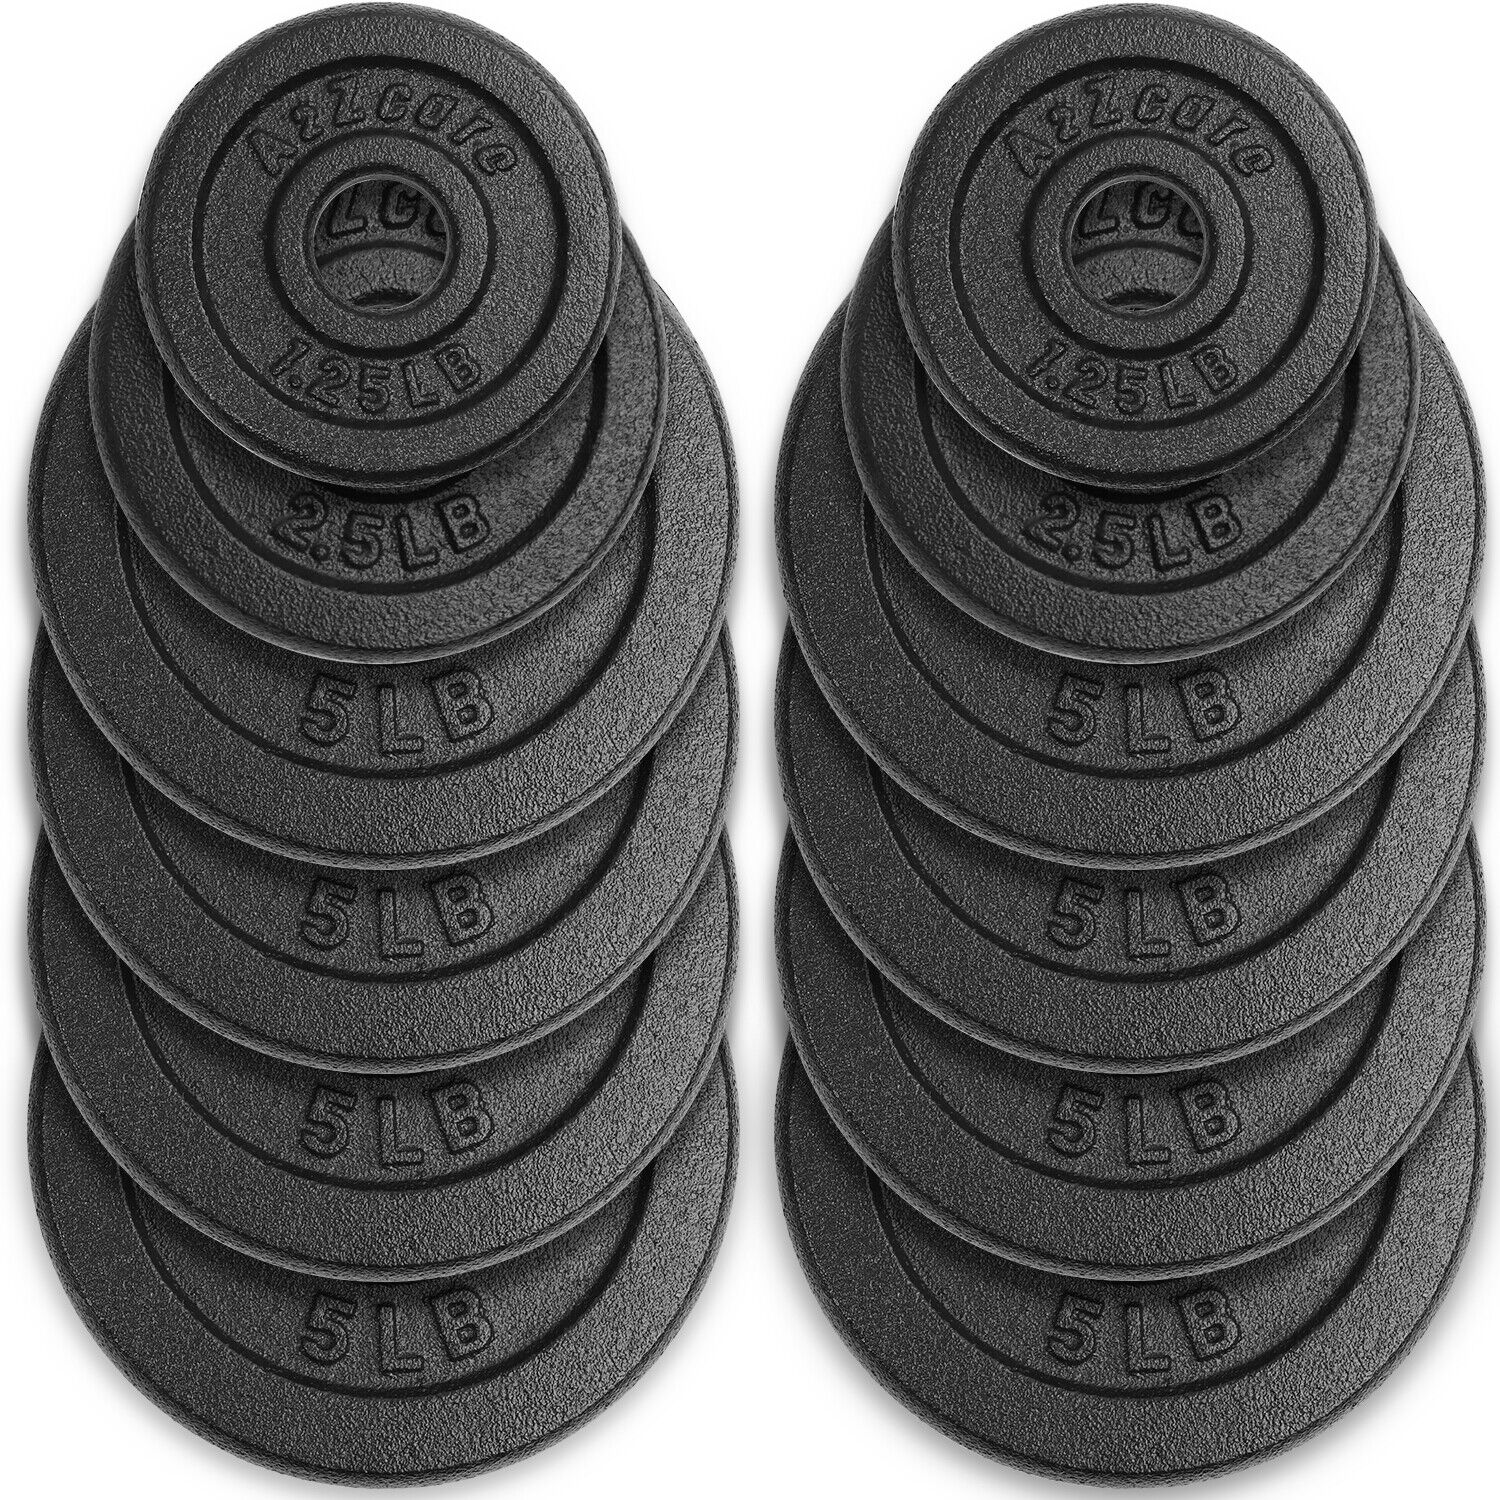 A2ZCARE Standard Cast Iron Weight Plates 1-Inch Center-Hole (47.5 Lbs)